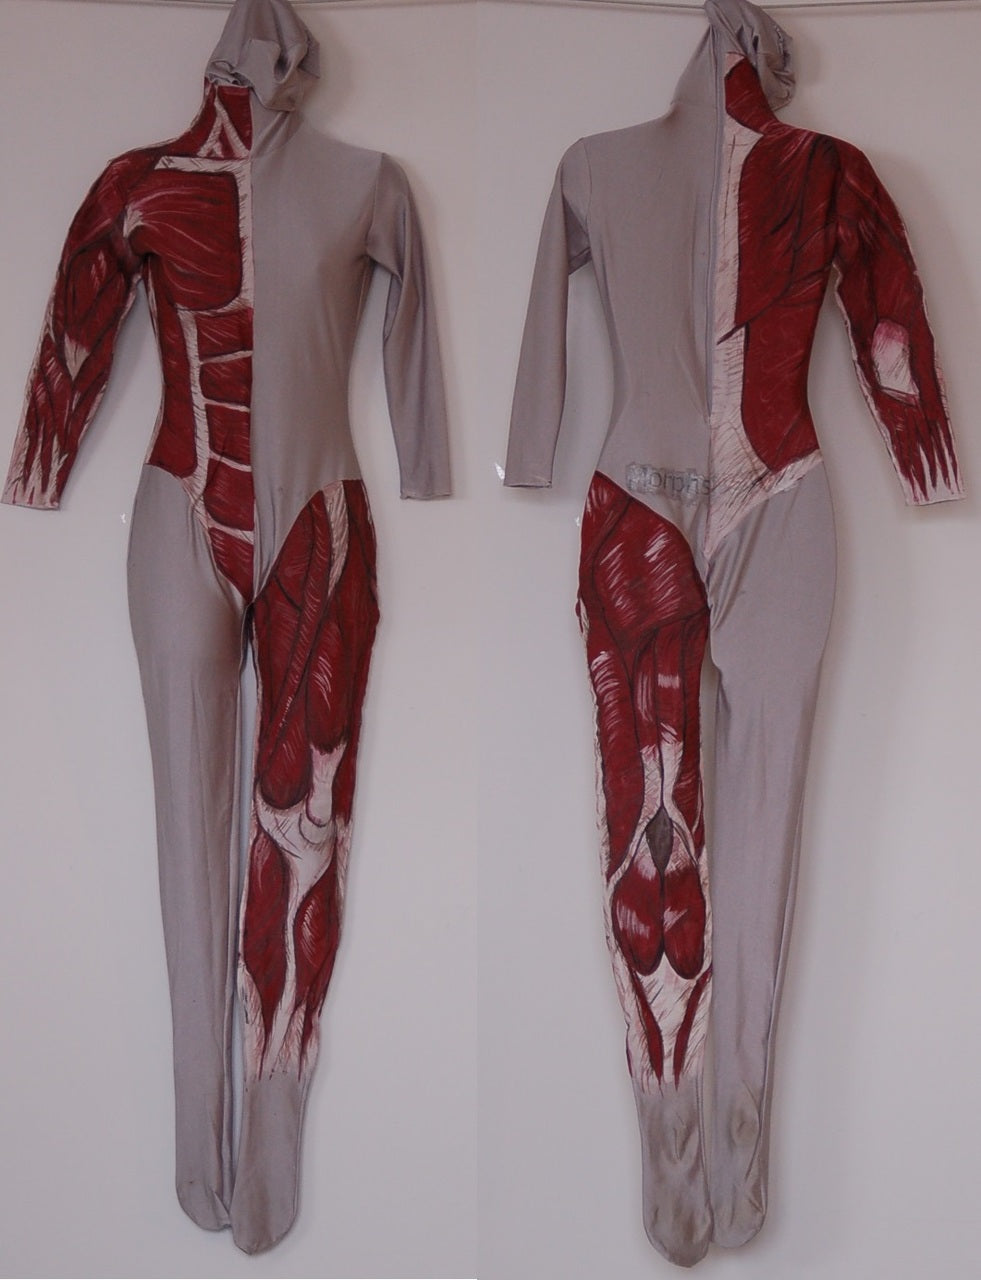 7 Morphsuits (6 As Shown, 1 Is Not Painted) guardcloset